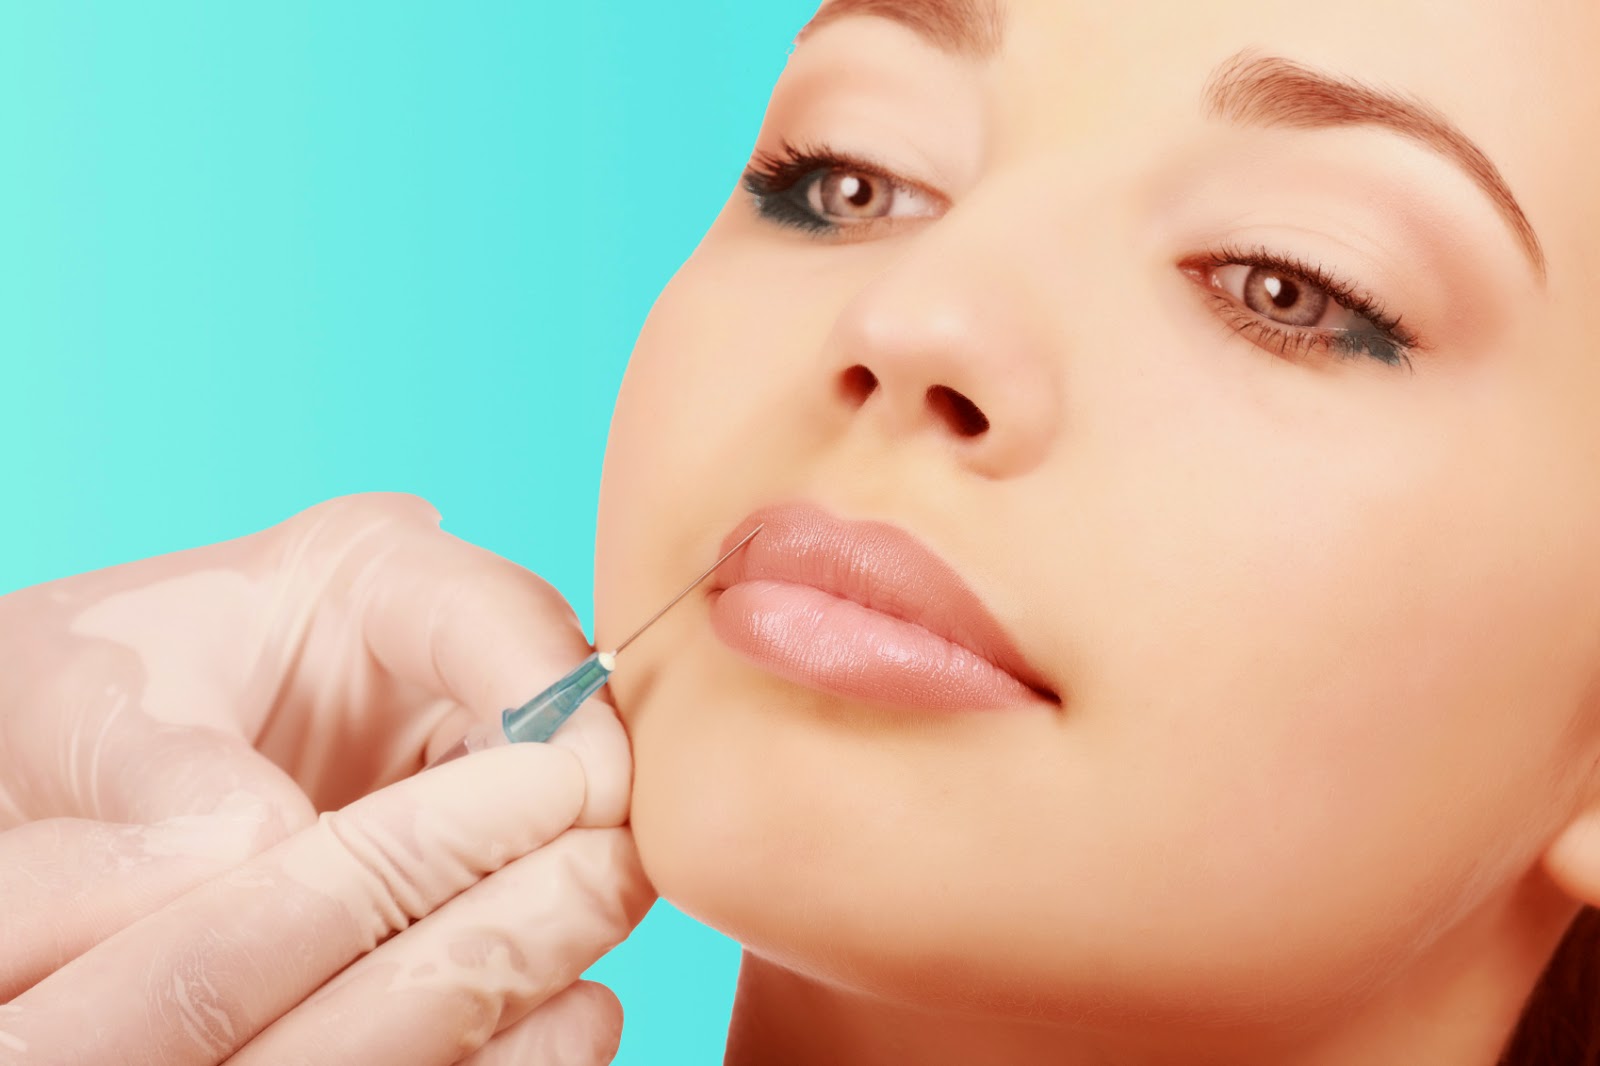 5 Things You Should Know Before Your Botox Appointment